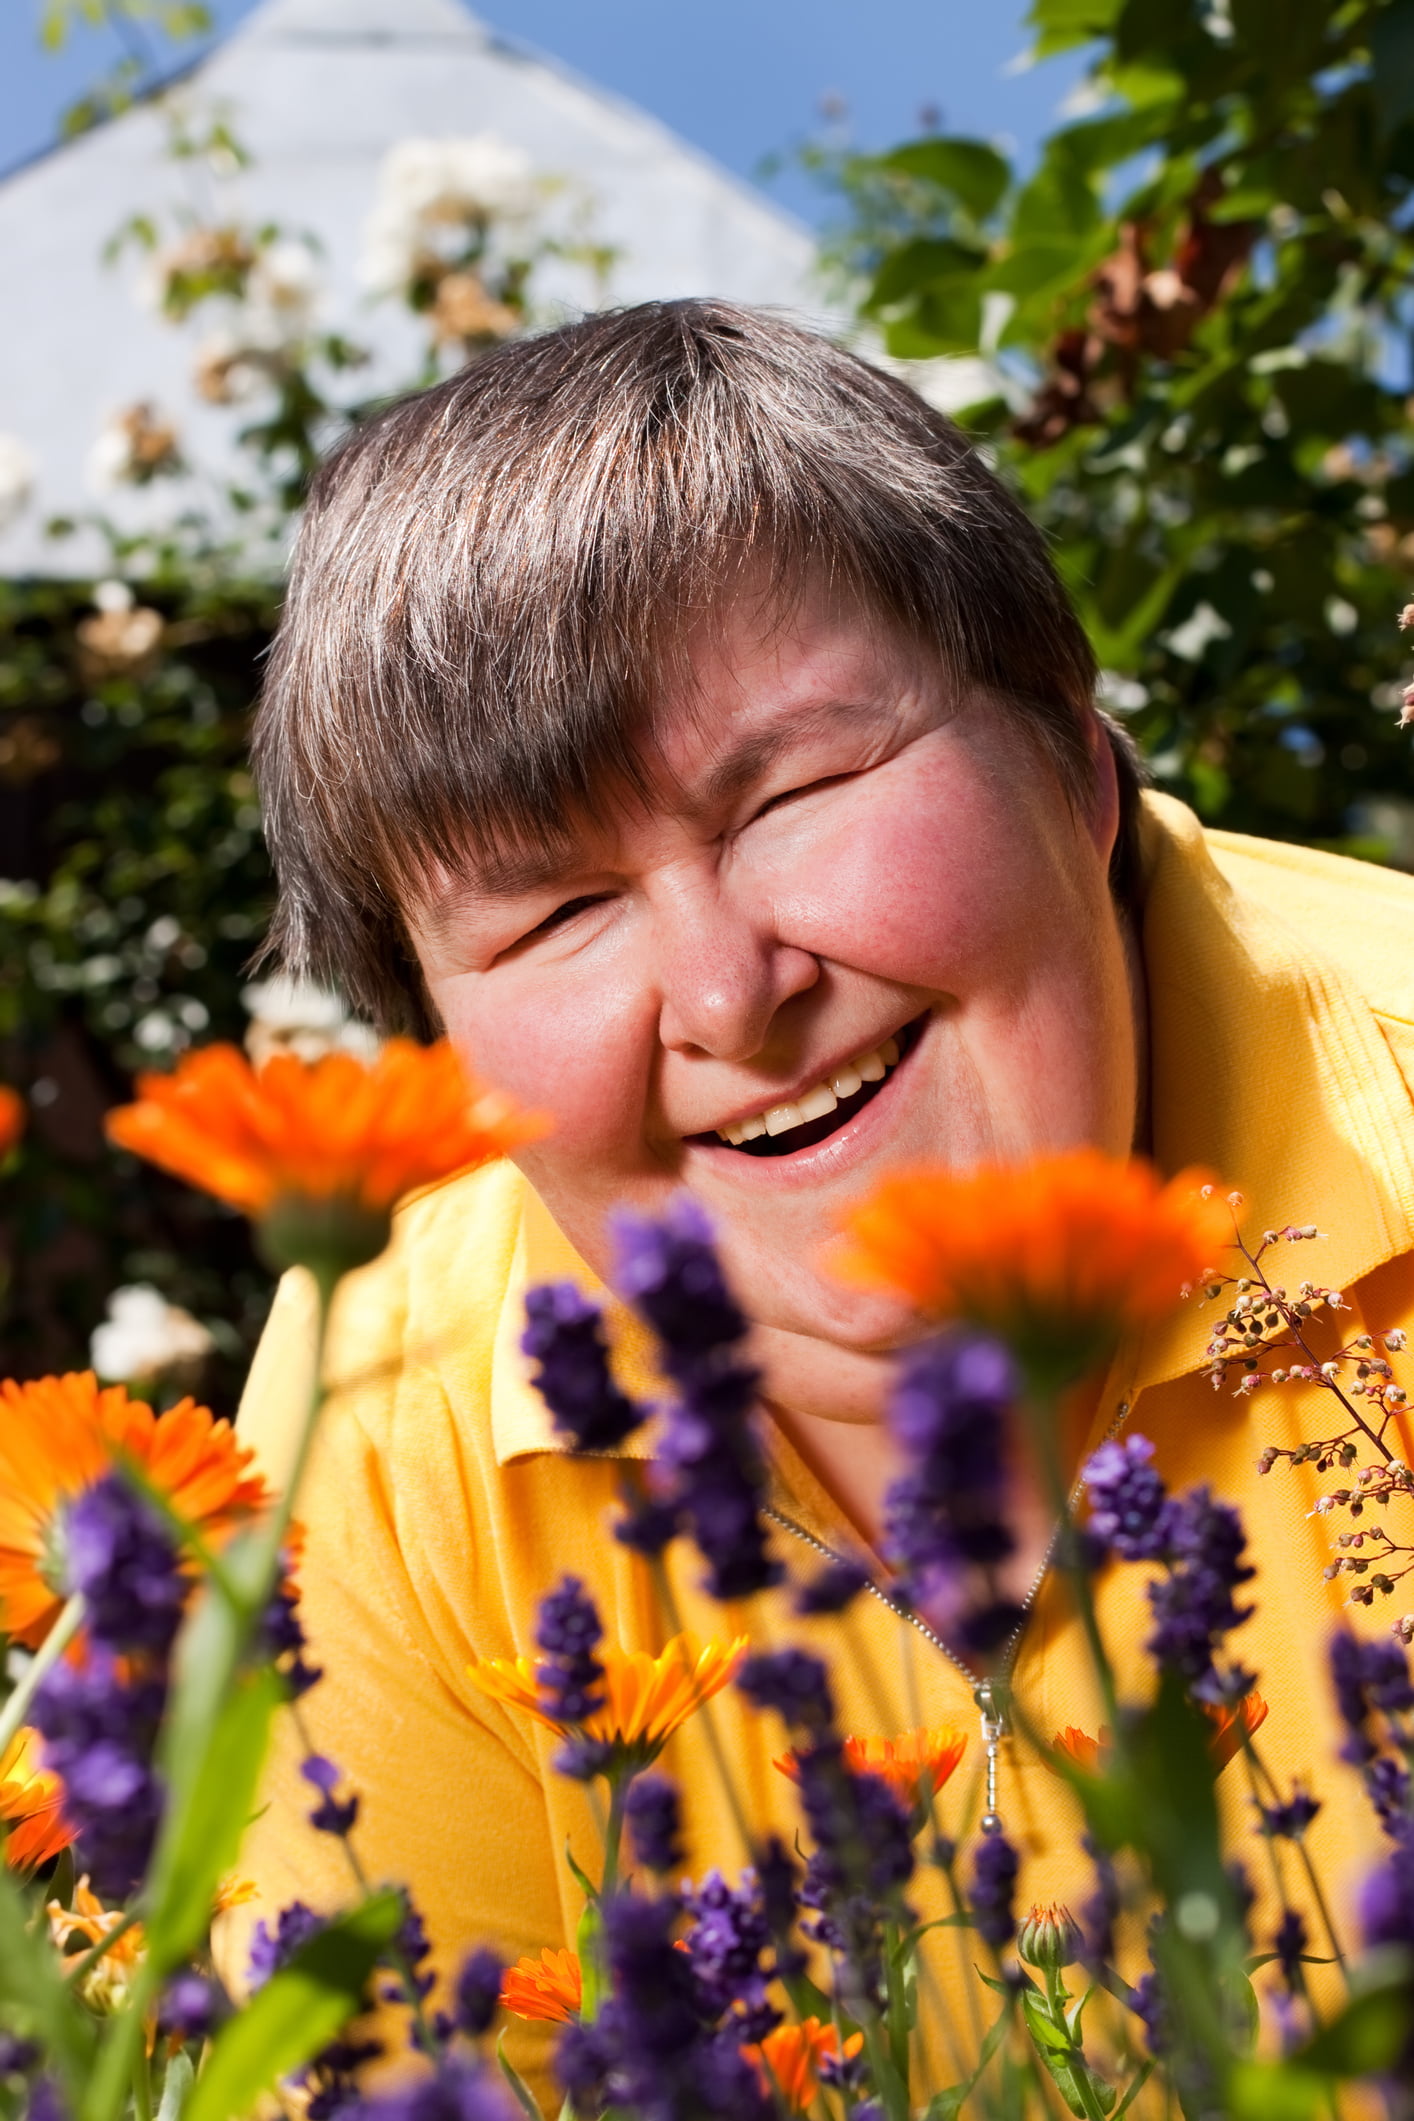 Smiling disabled woman appreciating flowers.